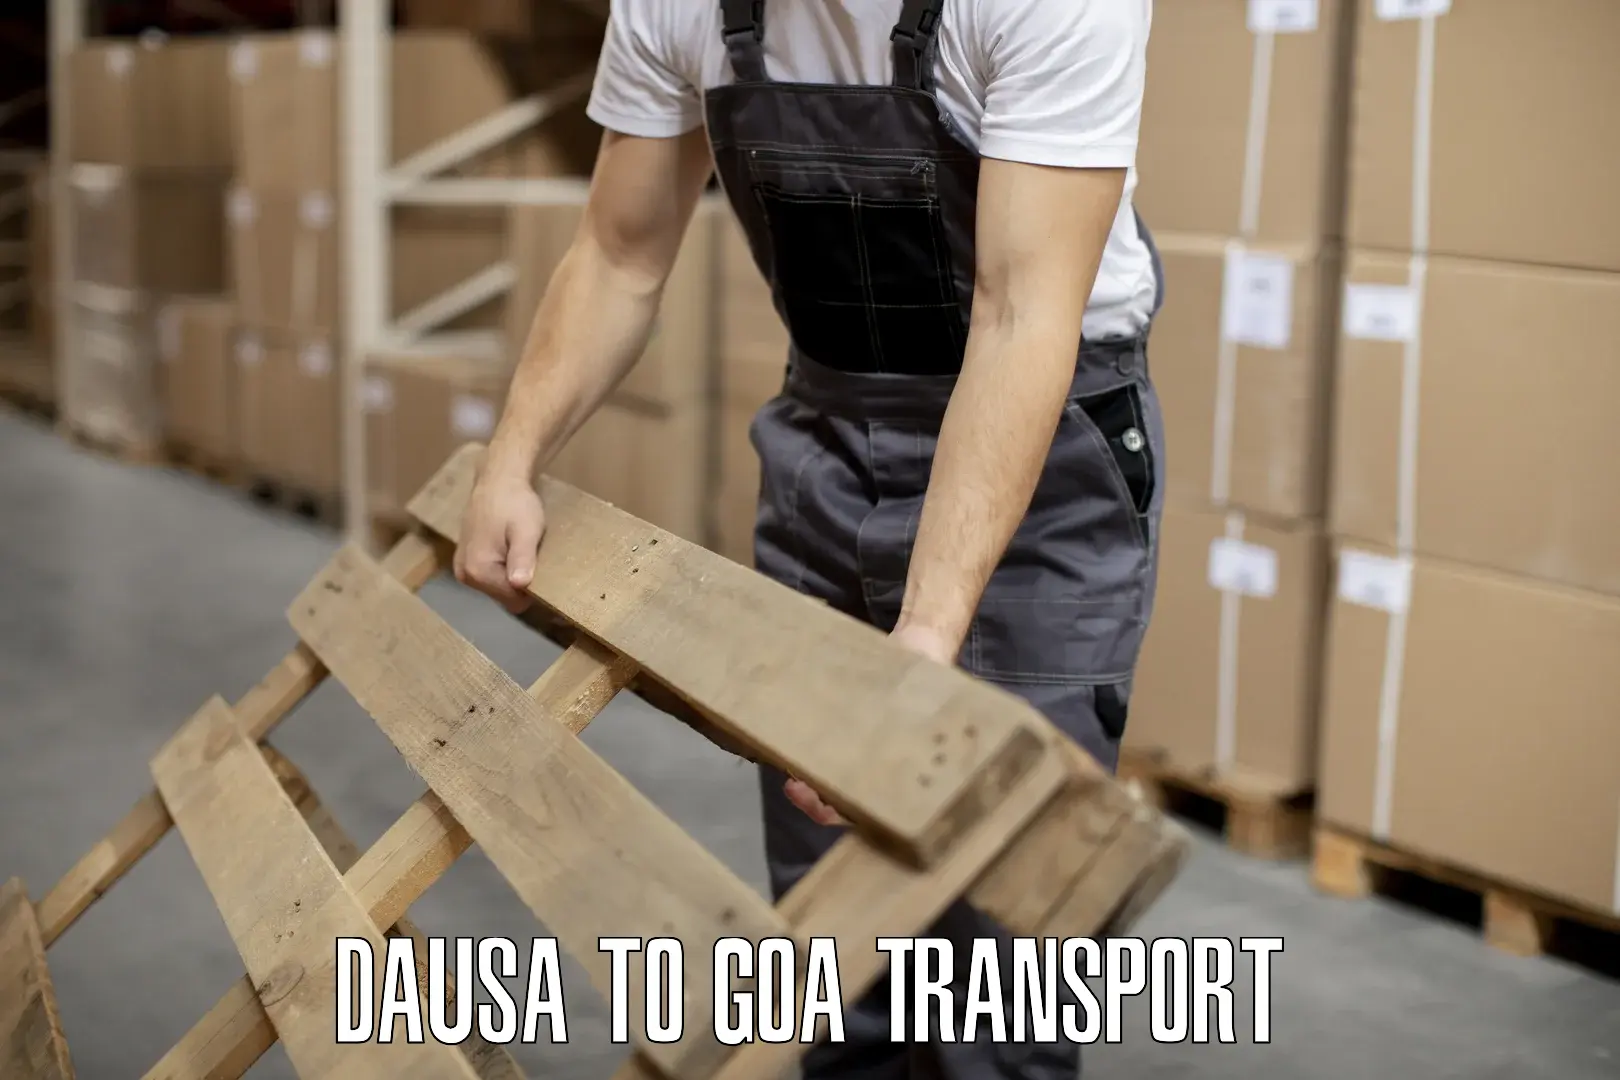 All India transport service Dausa to Bardez